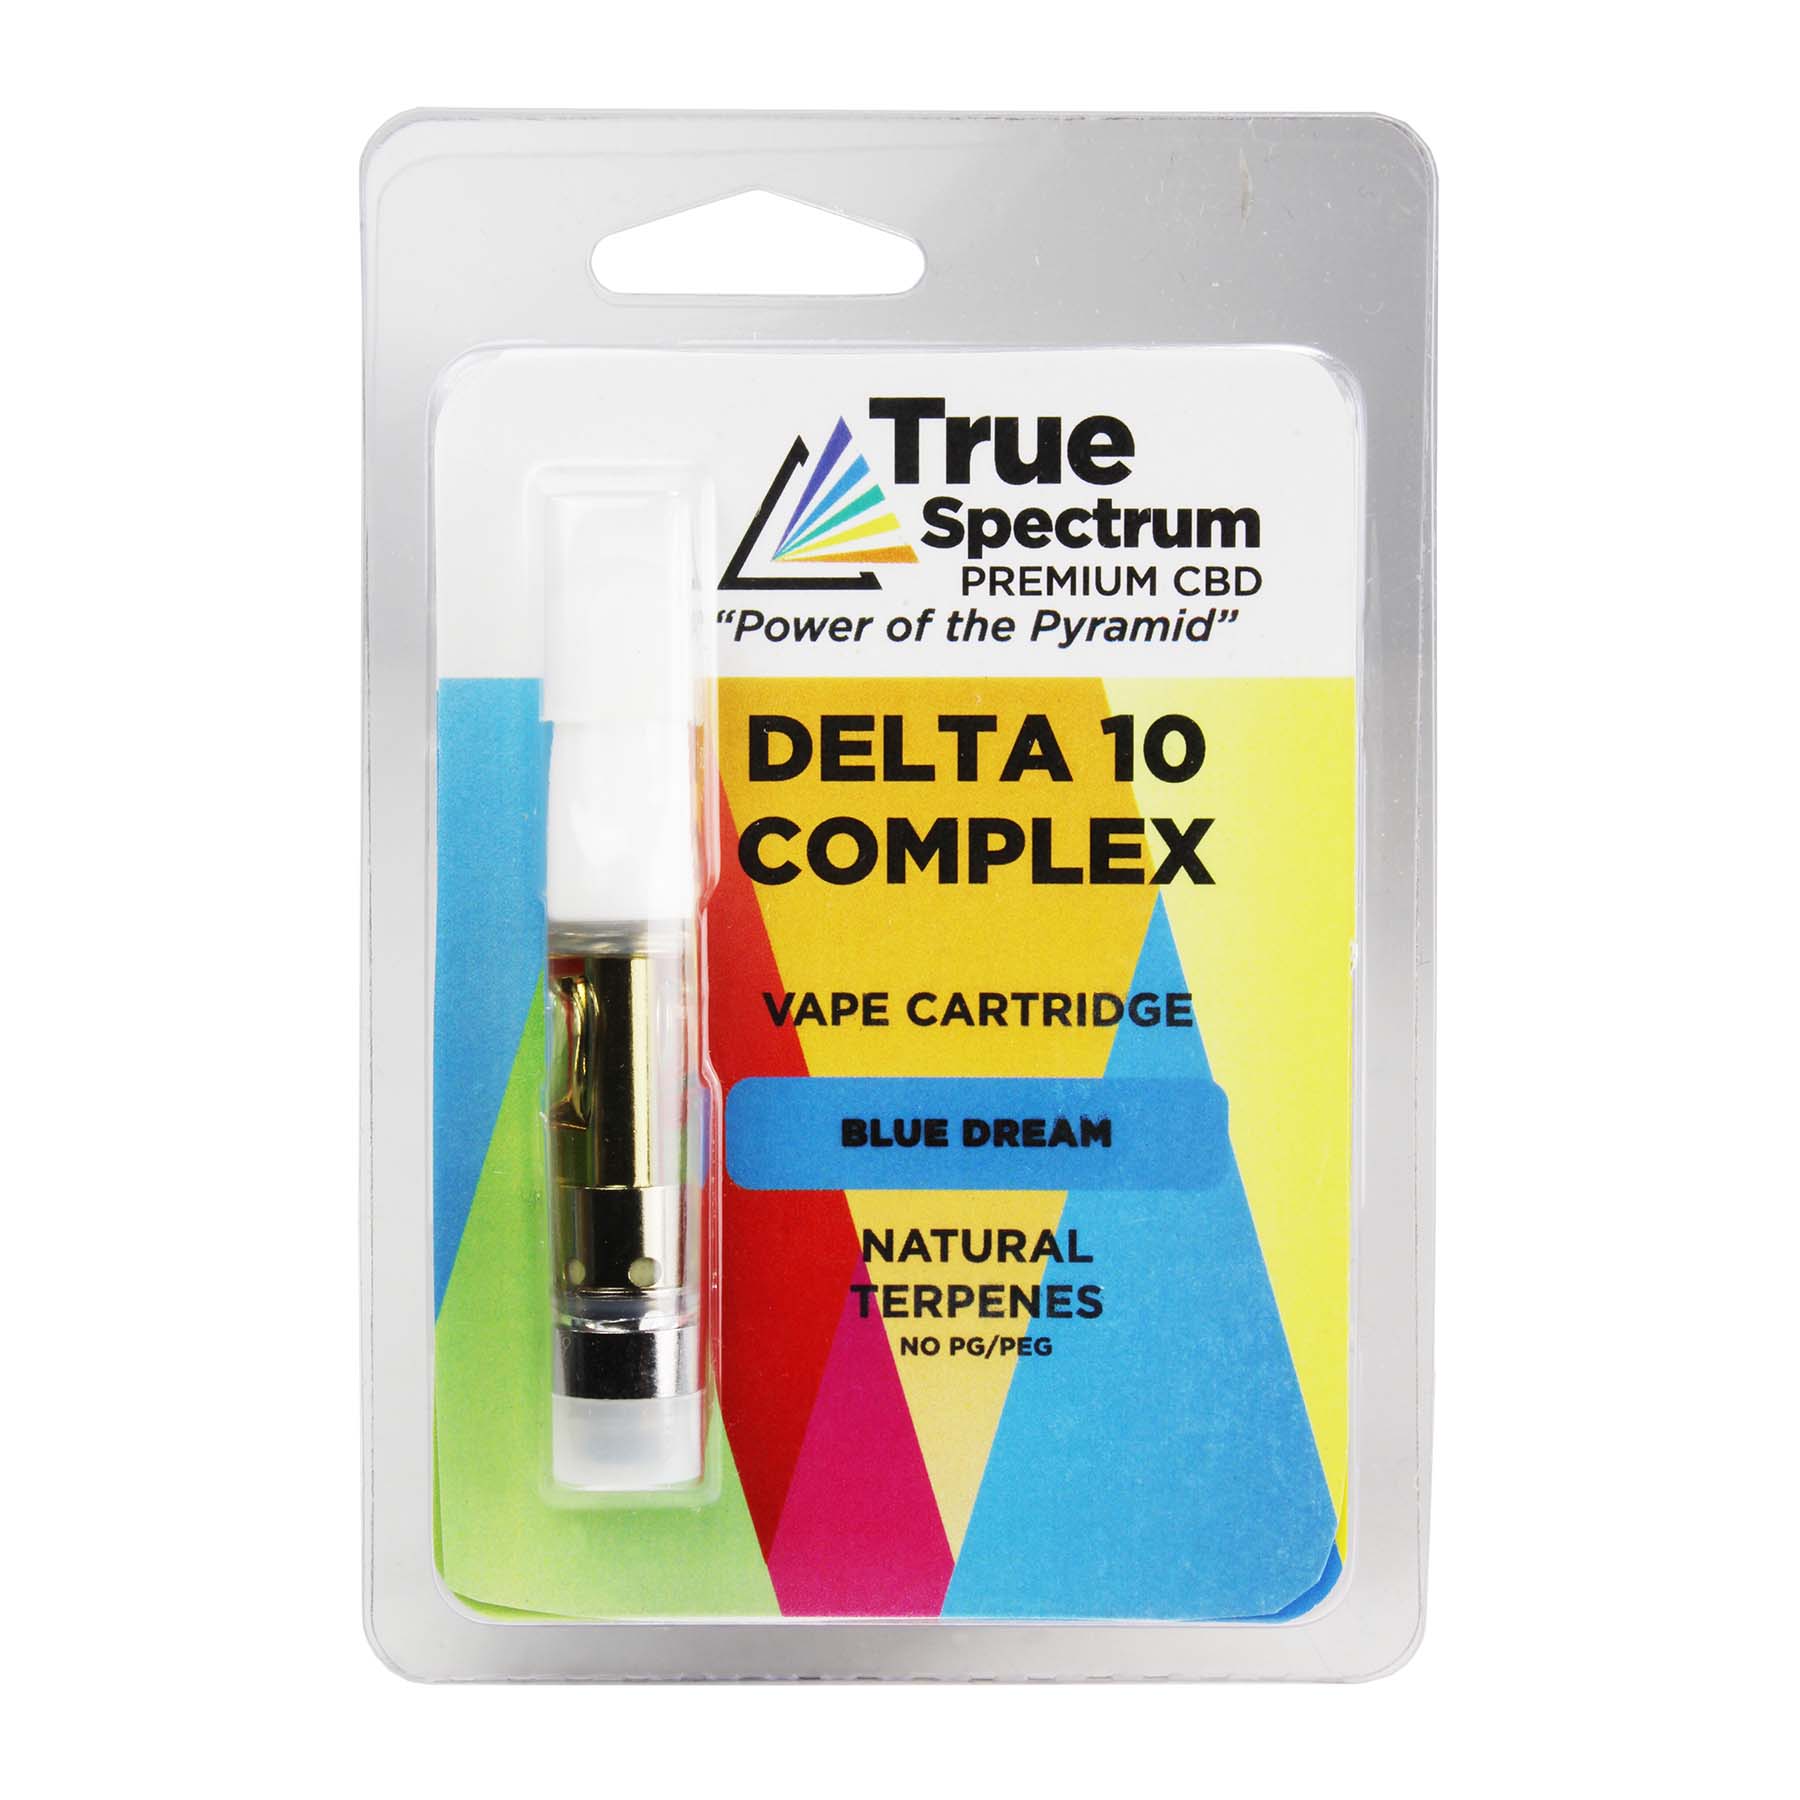 Delta 8 & 10 By My True Spectrum-Ultimate Review of Top Delta 8 & 10 Products